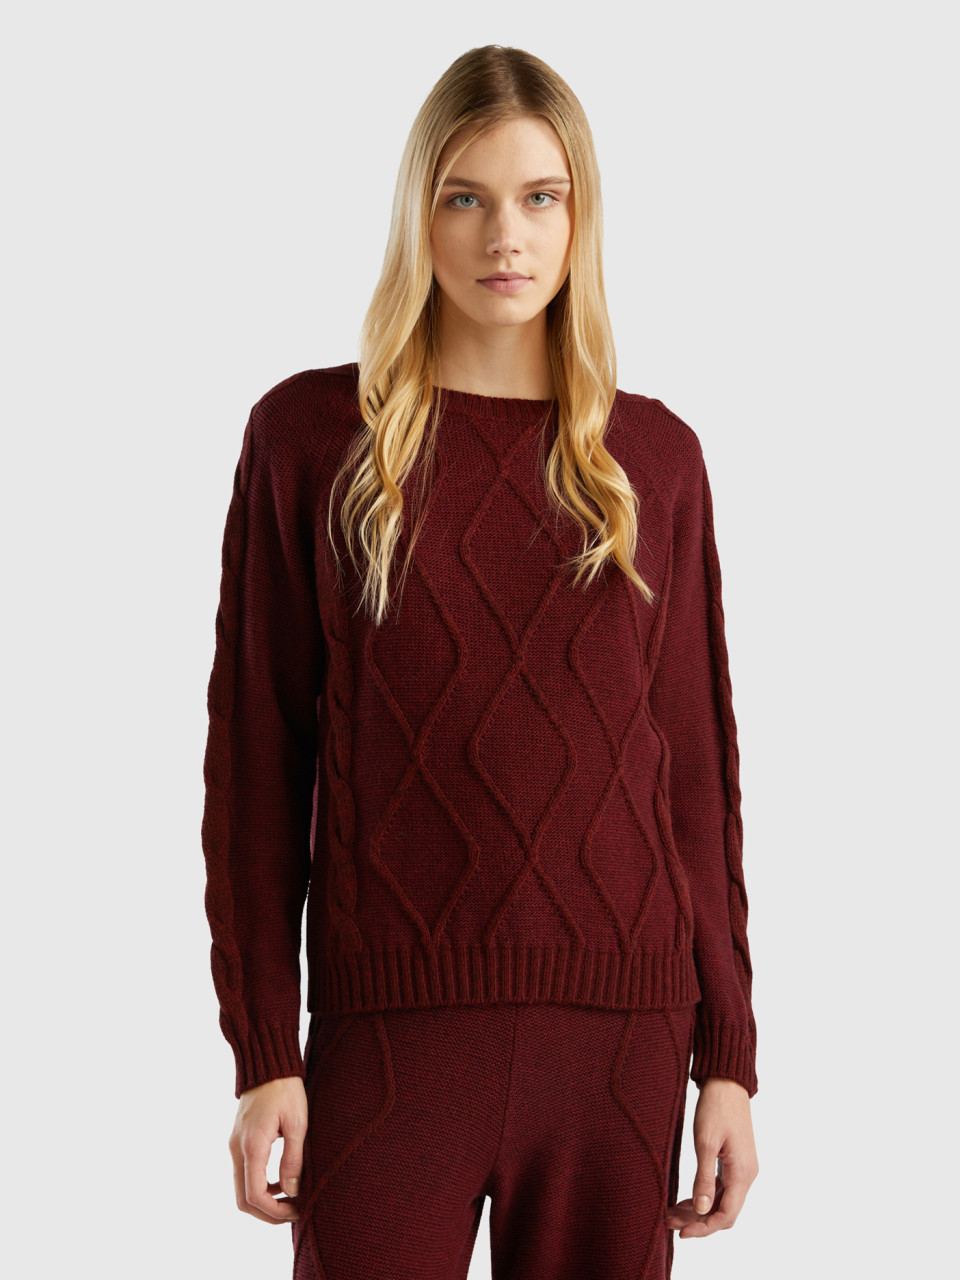 Benetton, Sweater With Cables And Diamonds, Burgundy, Women